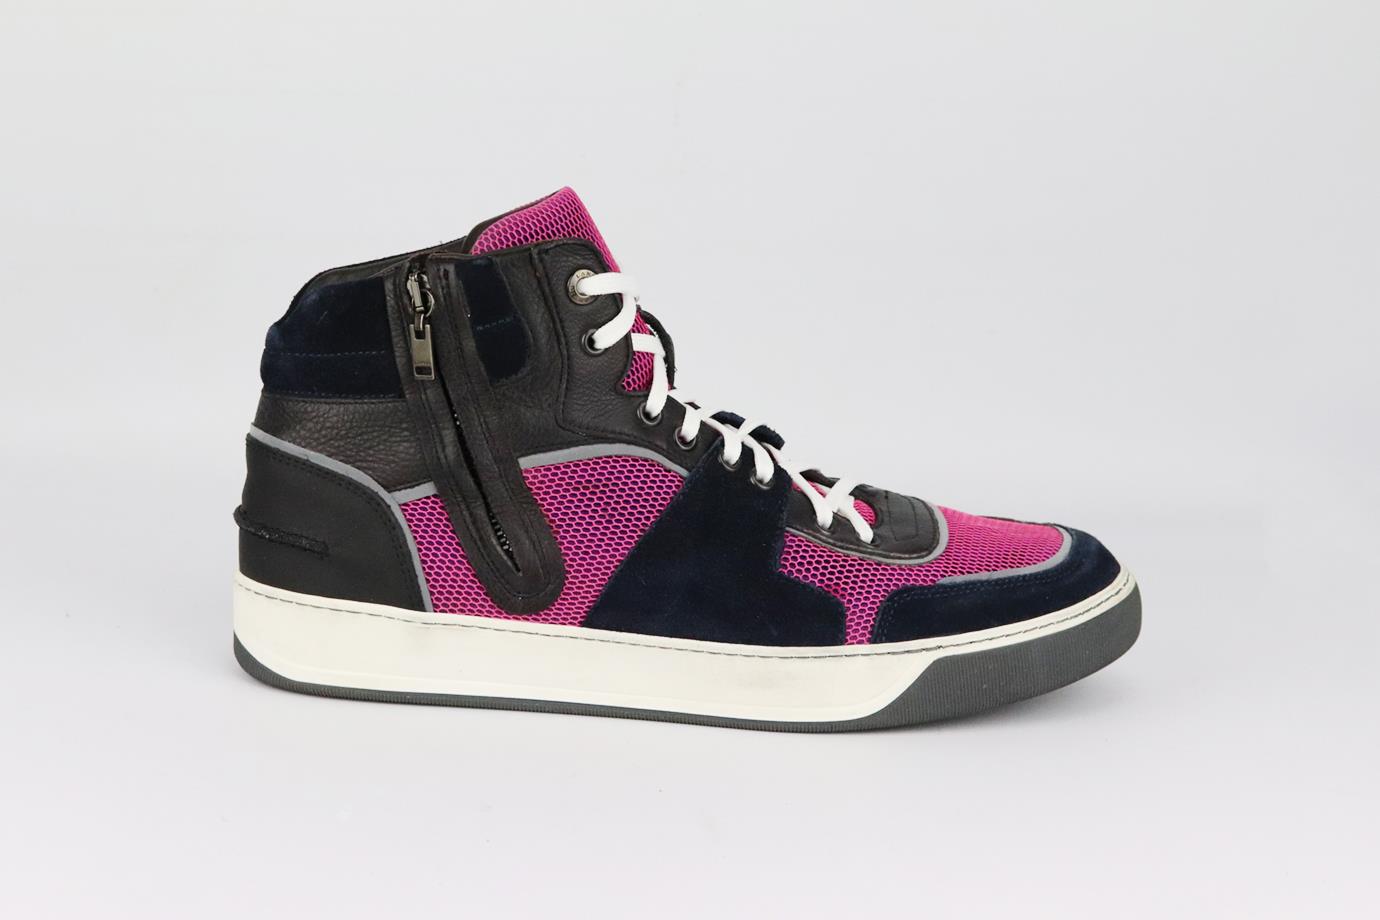 LANVIN MEN'S LEATHER, SUEDE AND MESH HIGH TOP SNEAKERS EU 43 UK 9 US 10